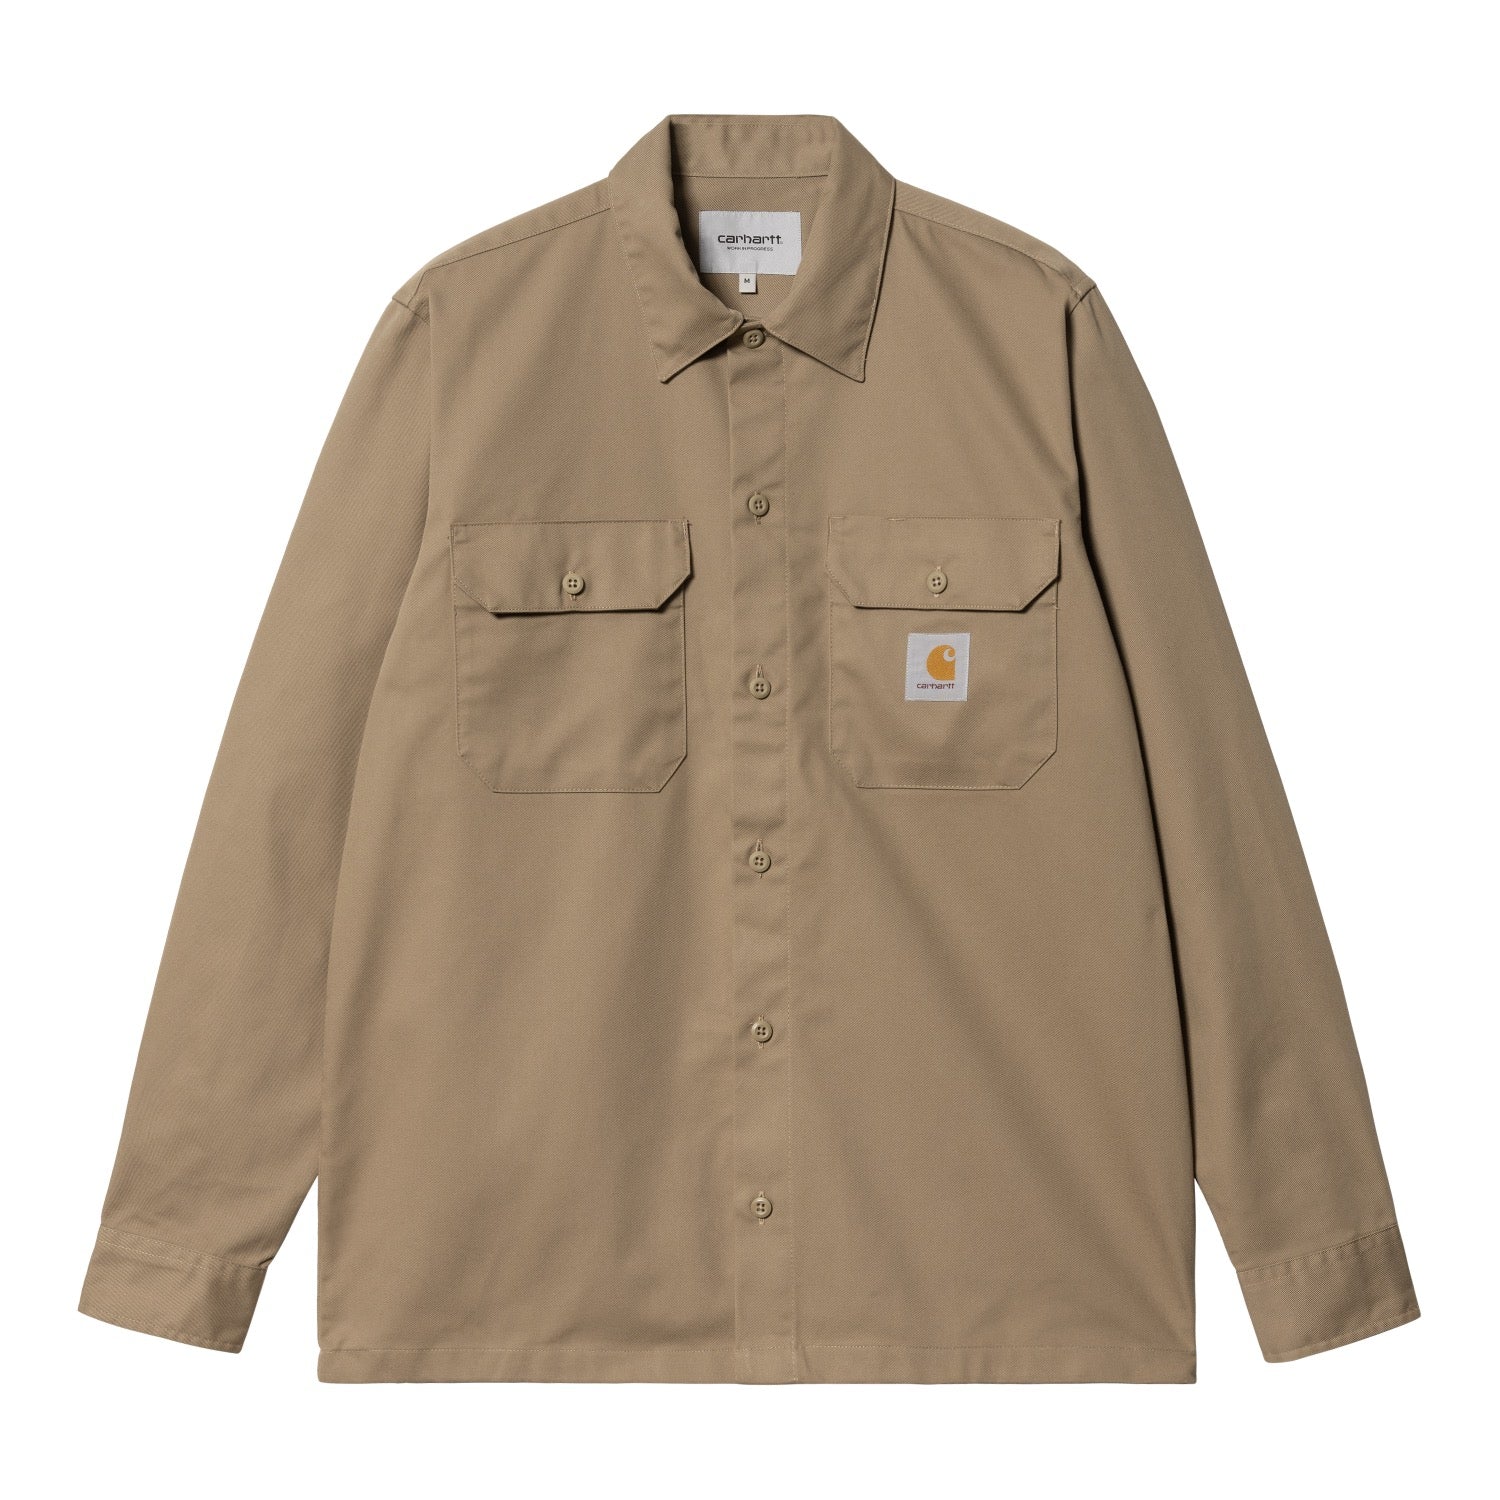 L/S MASTER SHIRT - Leather